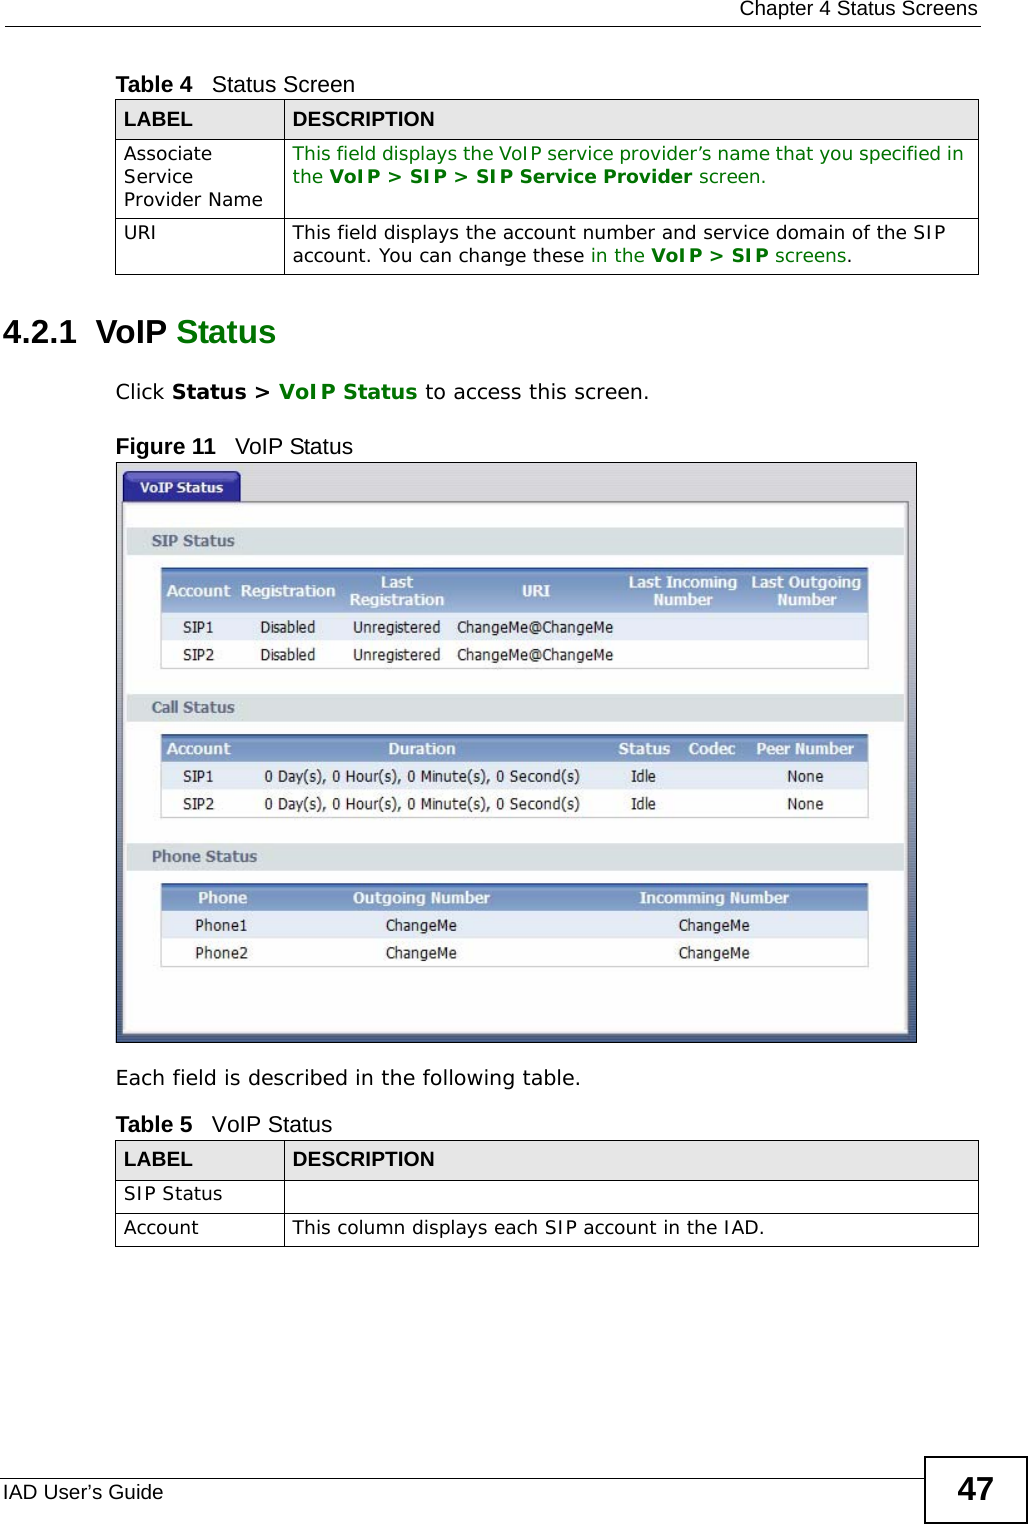  Chapter 4 Status ScreensIAD User’s Guide 474.2.1  VoIP StatusClick Status &gt; VoIP Status to access this screen. Figure 11   VoIP StatusEach field is described in the following table.Associate Service Provider Name This field displays the VoIP service provider’s name that you specified in the VoIP &gt; SIP &gt; SIP Service Provider screen.URI This field displays the account number and service domain of the SIP account. You can change these in the VoIP &gt; SIP screens.Table 4   Status ScreenLABEL DESCRIPTIONTable 5   VoIP Status LABEL DESCRIPTIONSIP StatusAccount This column displays each SIP account in the IAD.